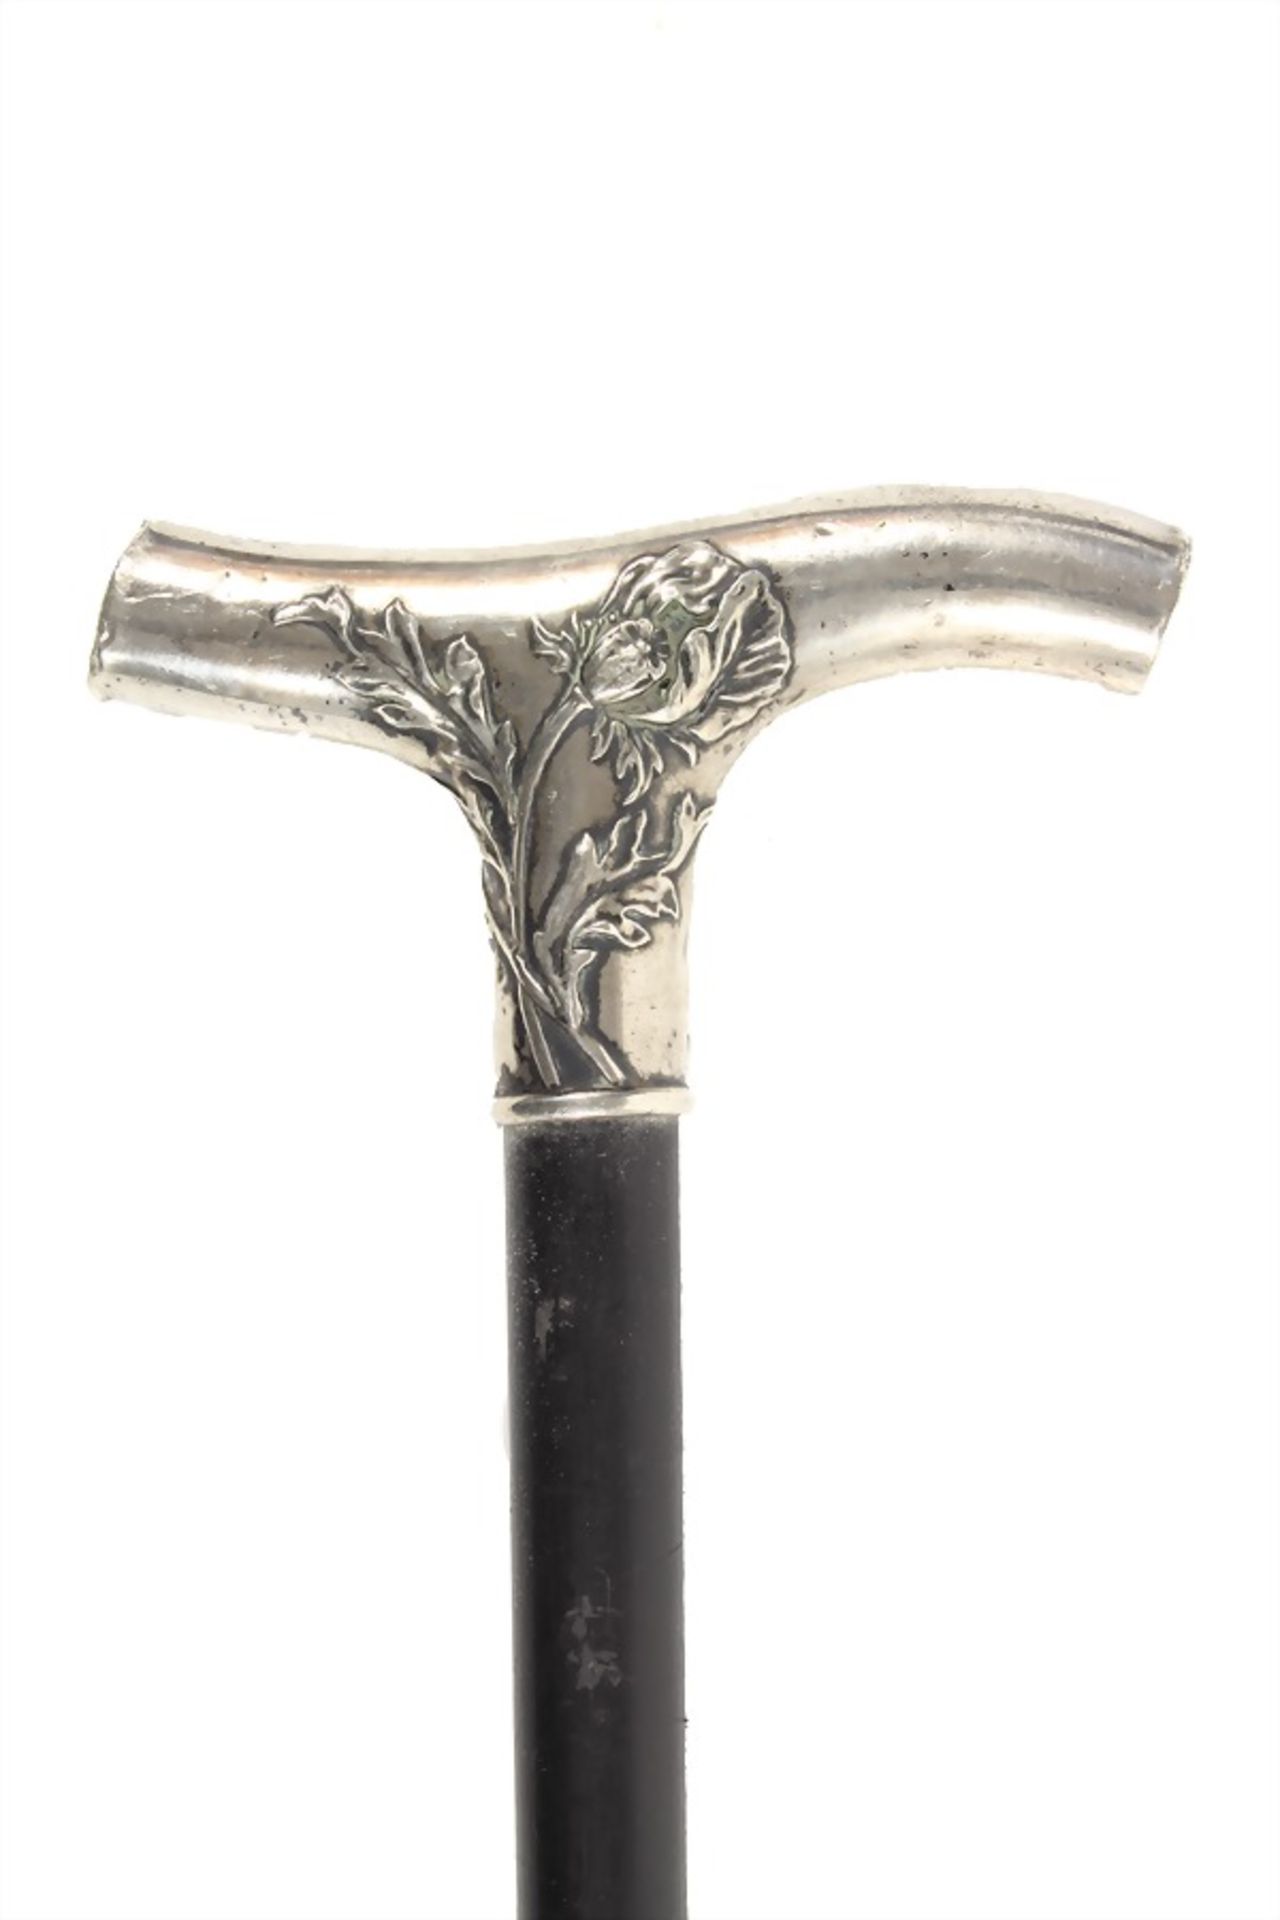 stick "JUGENDSTIL" around 1900, so-called "FRITZ-KRÜCKE", silver 800/000, poppy with leaves, stained - Image 2 of 2